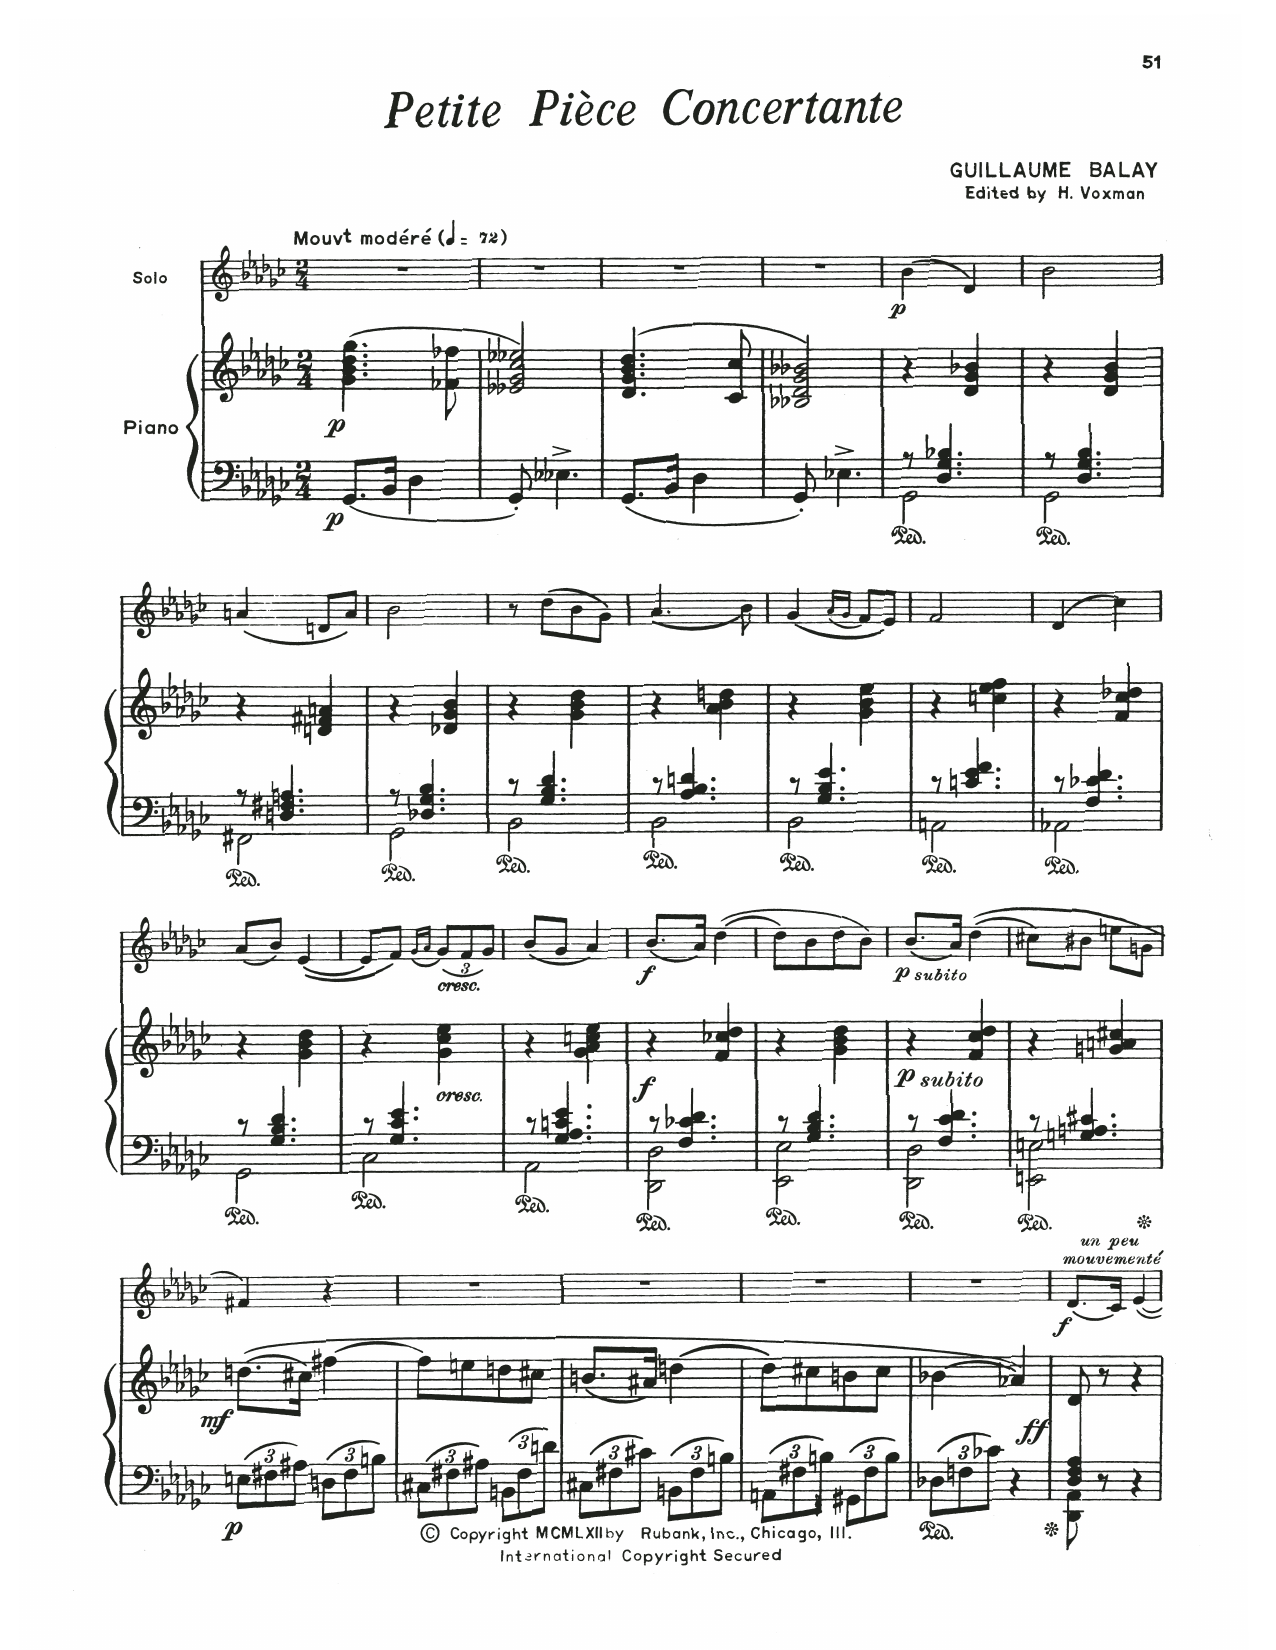 Download Guillaume Balay Petite Piece Concertante Sheet Music